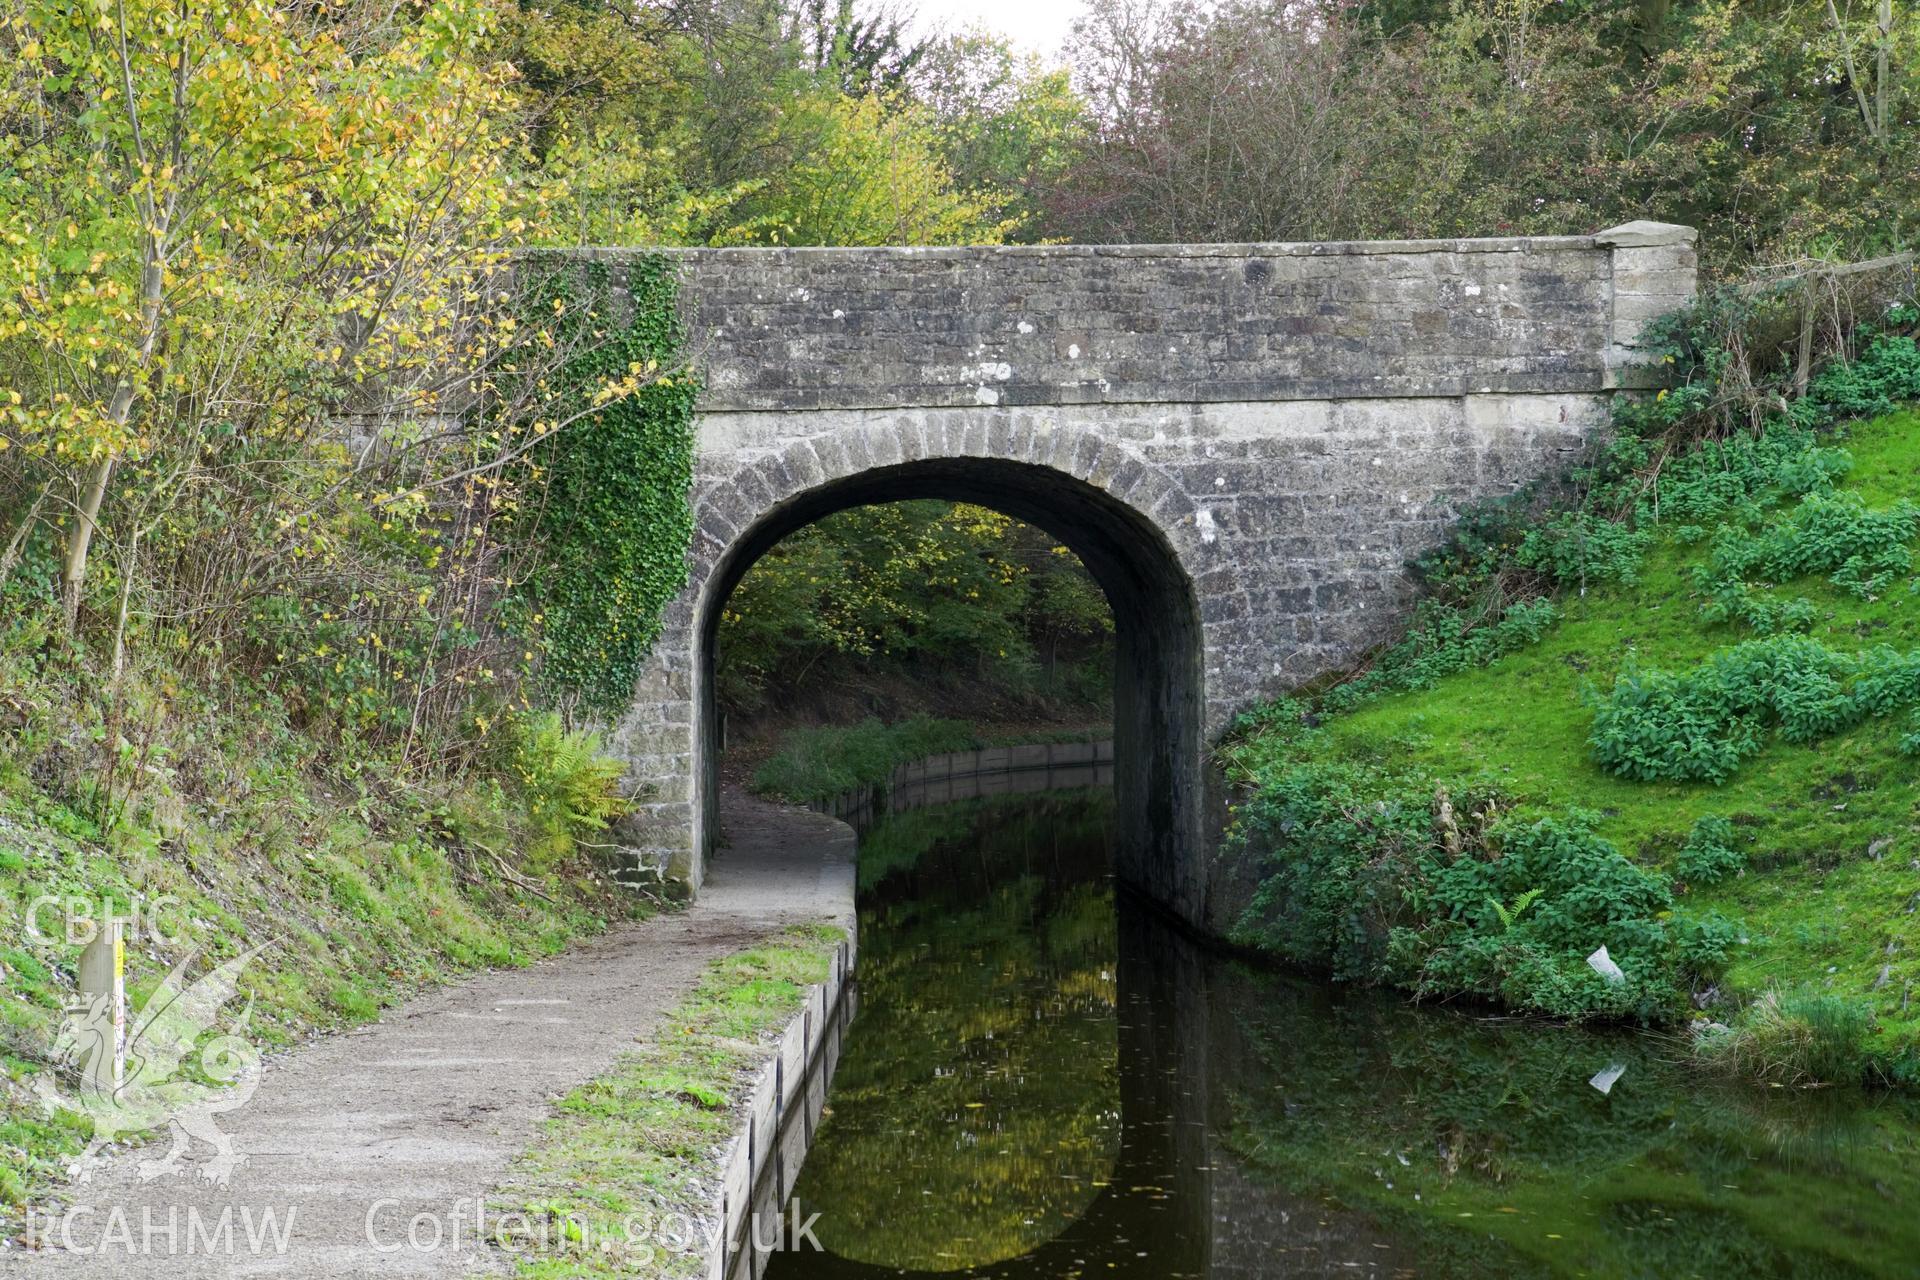 View of Irish Bridge Number 27, Llangollen Canal, taken in 2006. The huge workforce involved in building the canal between 1793 and 1808 included irish workers.